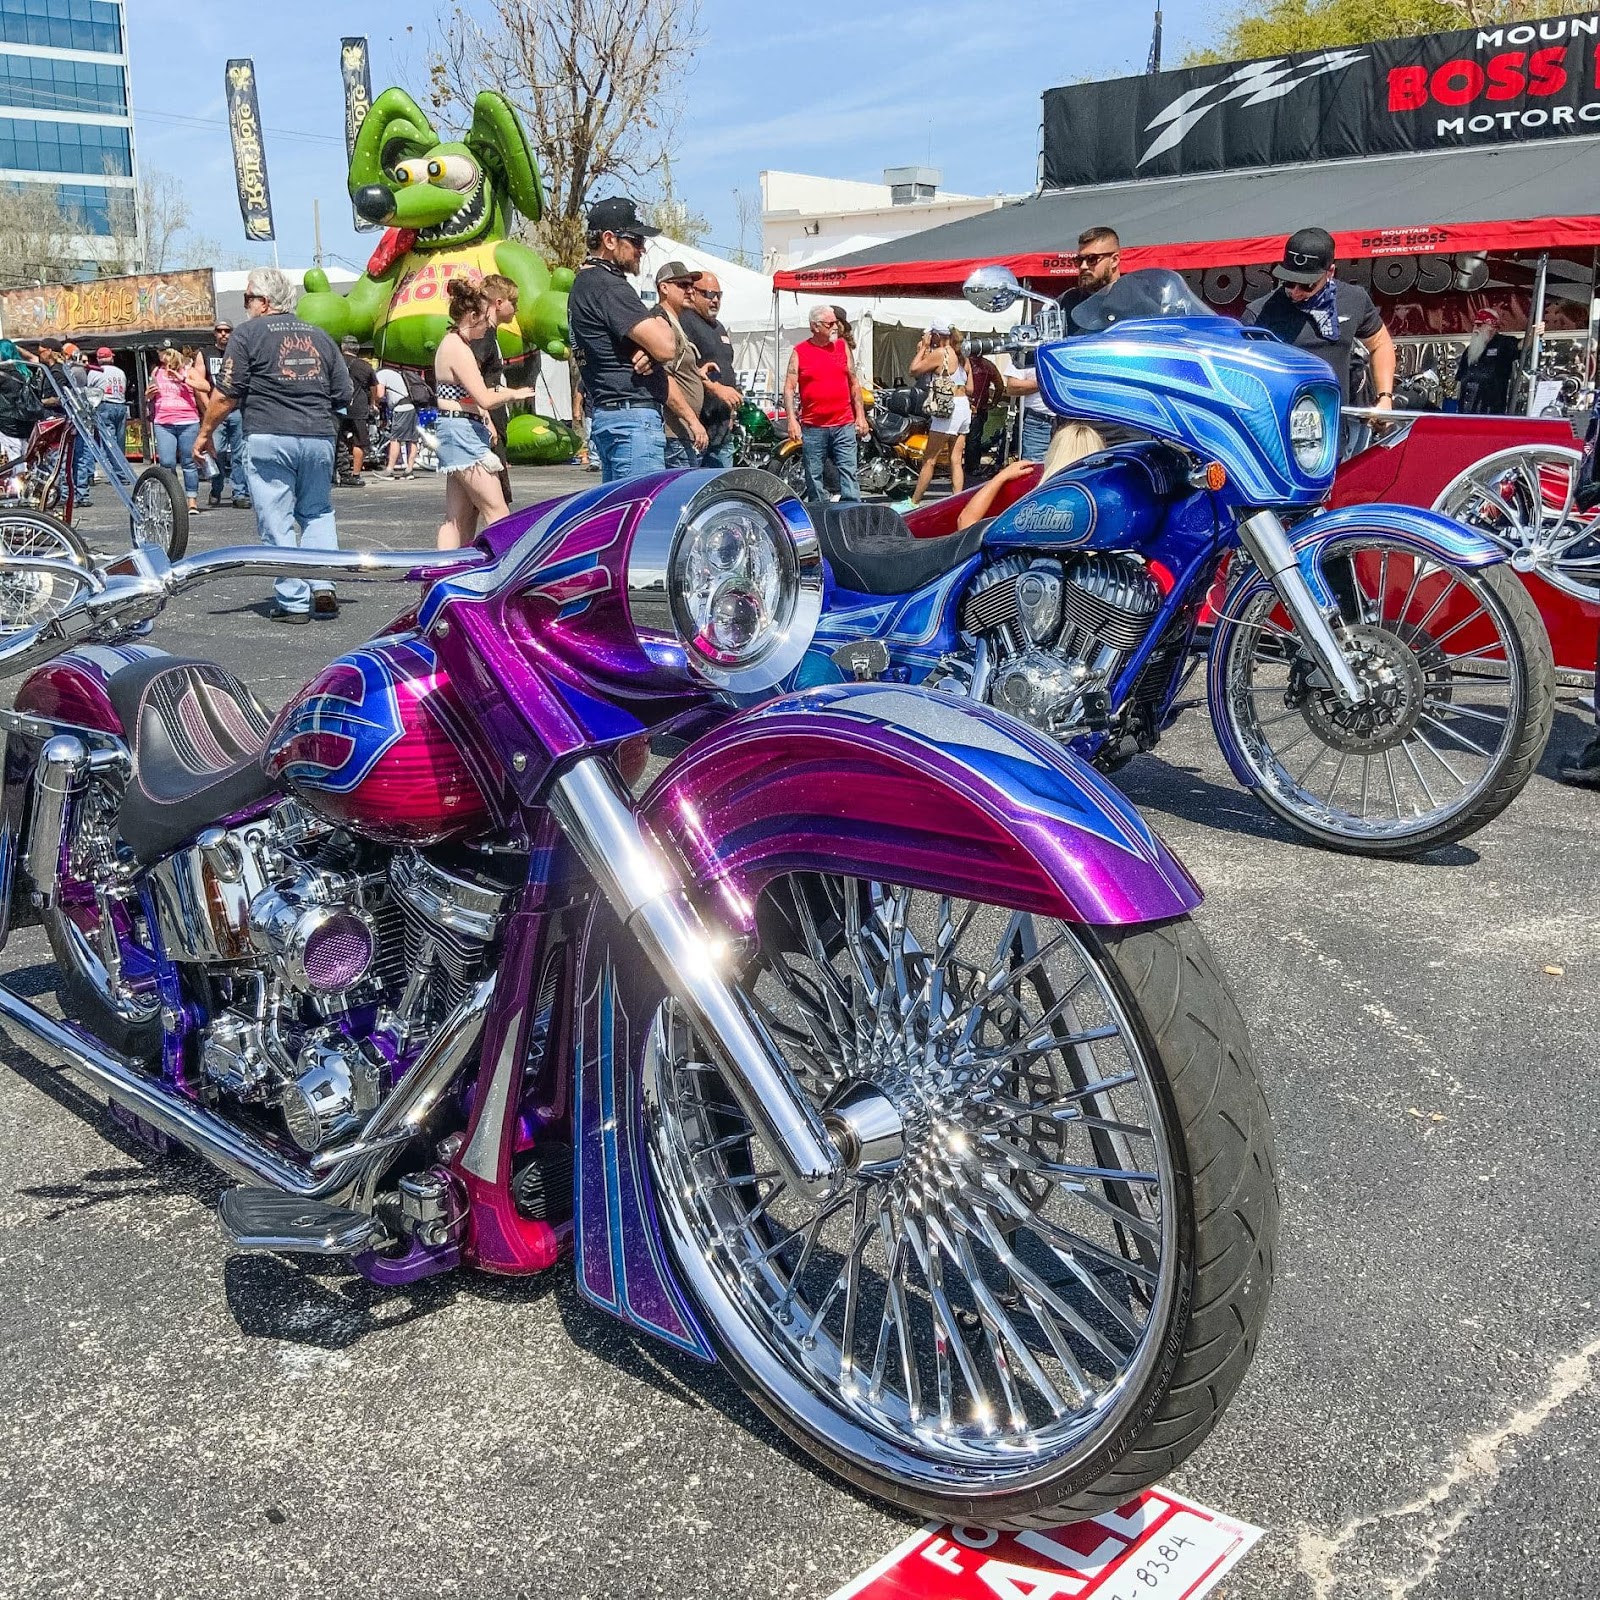 A sparkling fuchsia chopper low rider with shiny chrome details and a matching blue sparkly motorcycle customized in the background.